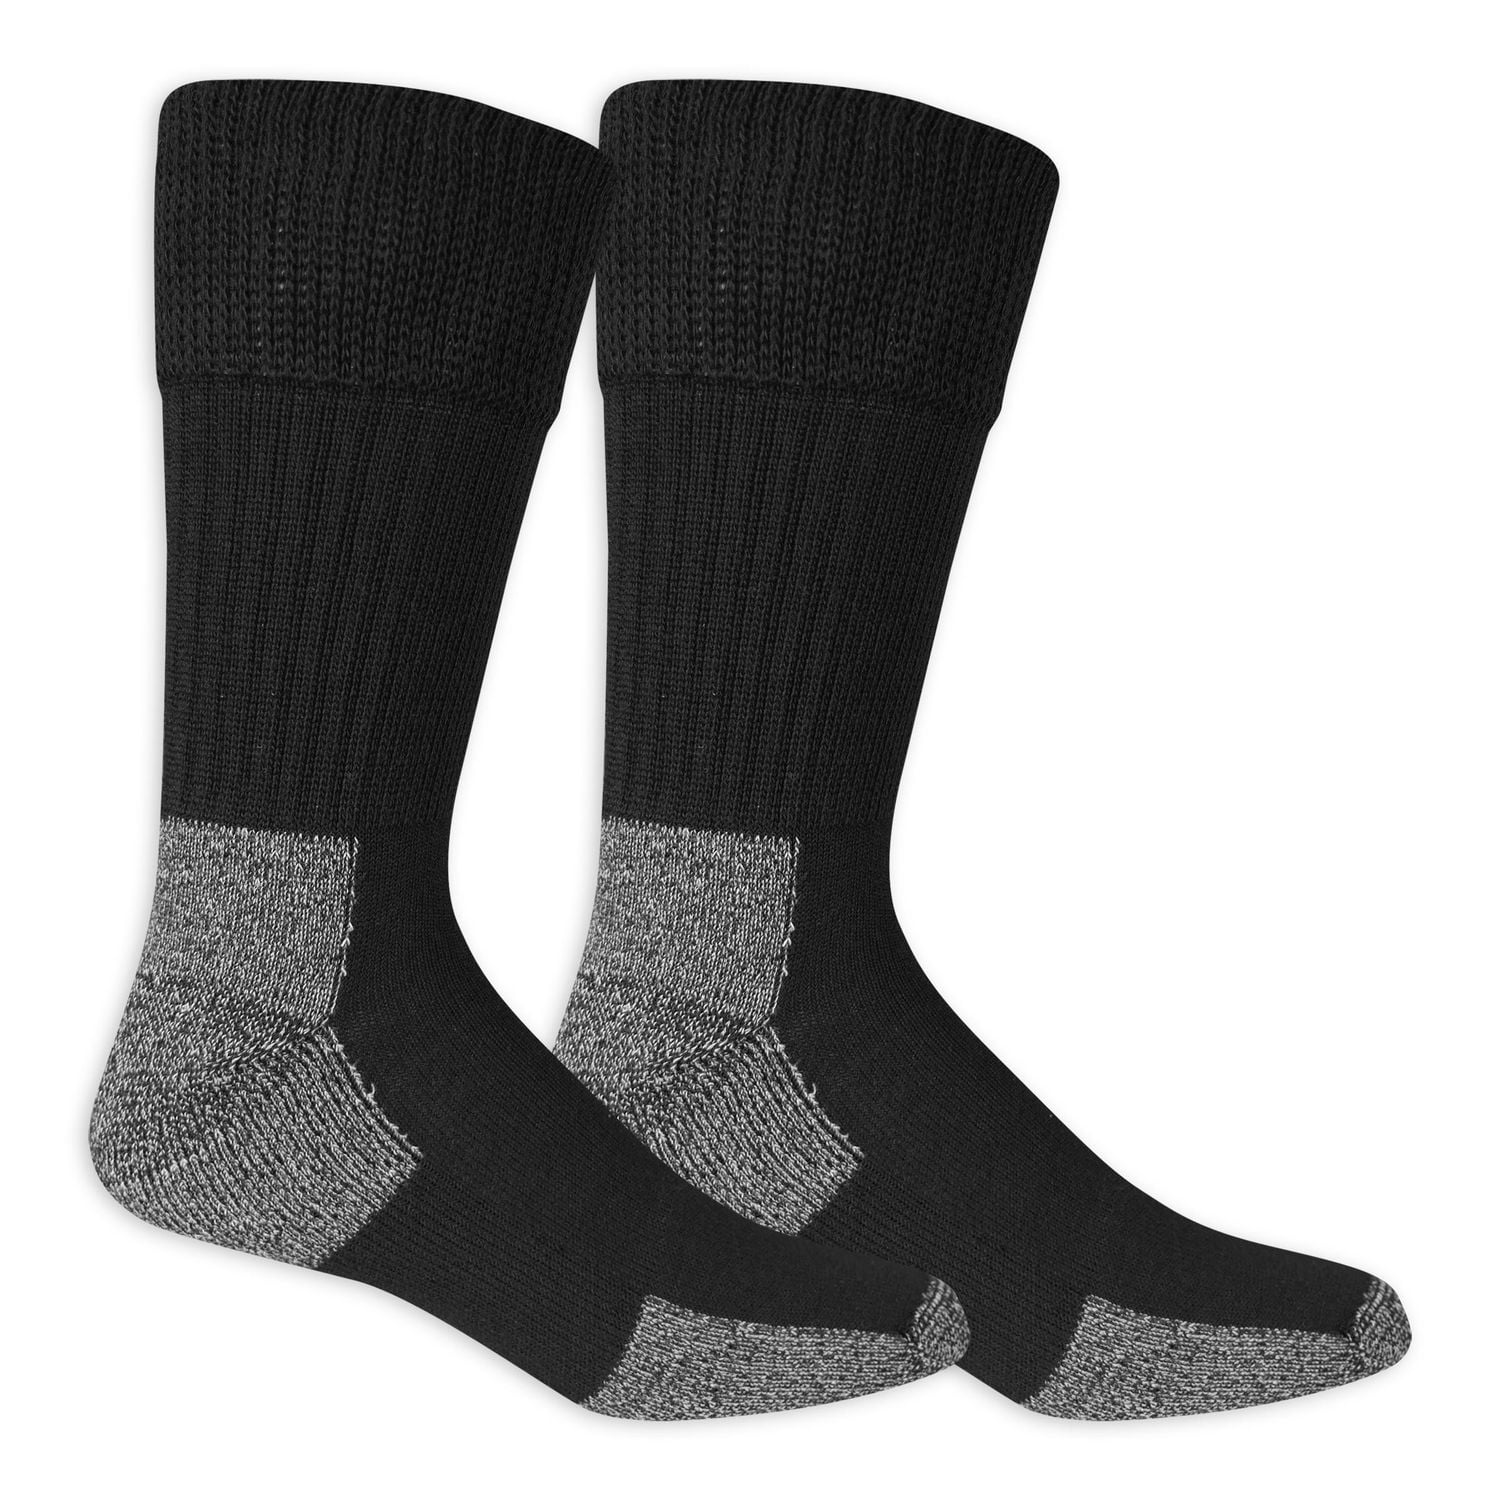 Dr.Scholl's Dr. Scholl's Men's Diabetic Crew Socks - 2 Pairs, Available in  Sizes: 7-12 